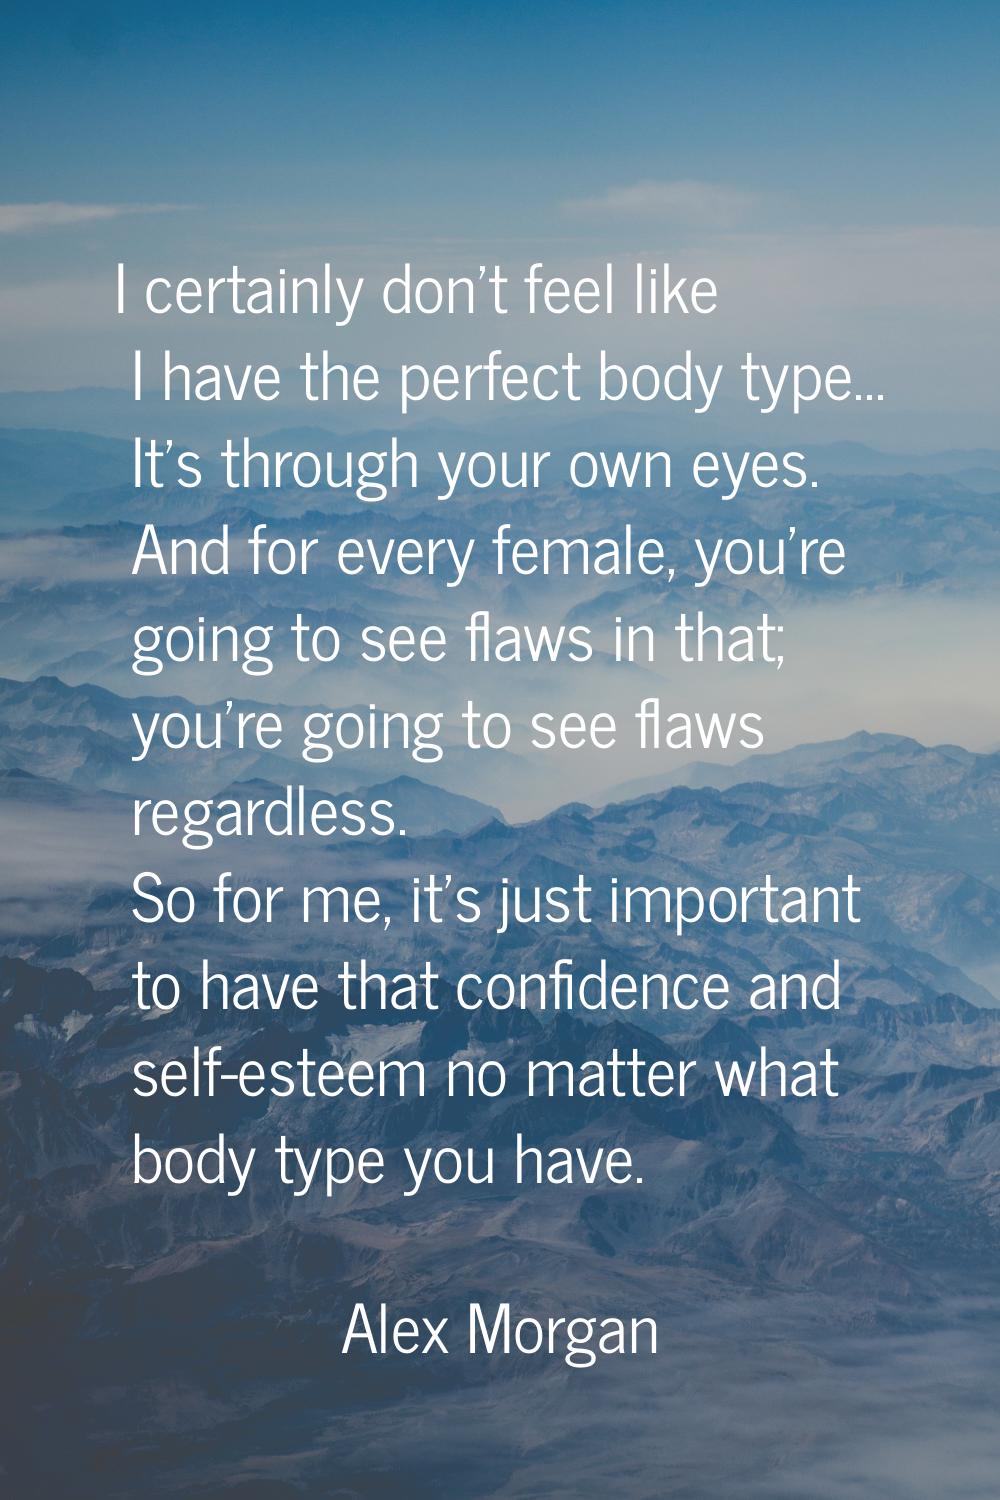 I certainly don't feel like I have the perfect body type... It's through your own eyes. And for eve